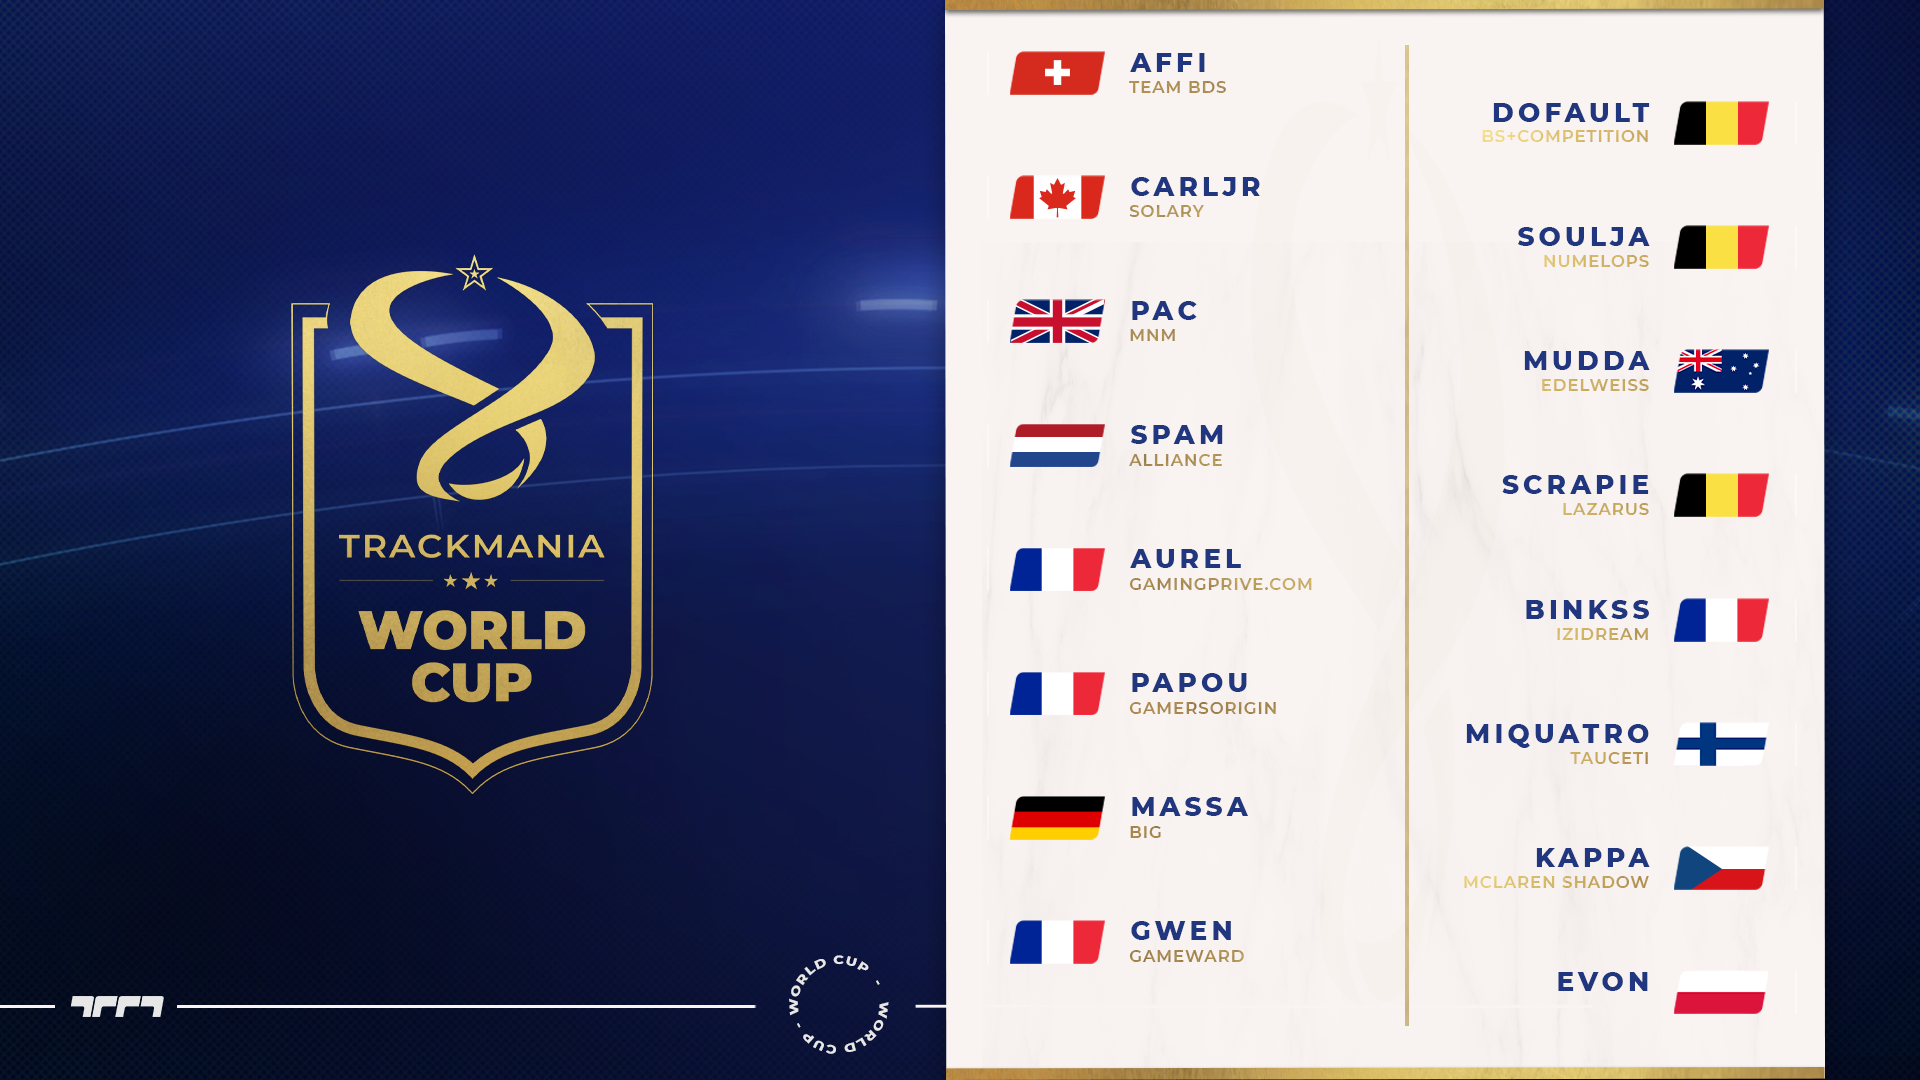 Trackmania World Cup Group Stage is just around the corner!